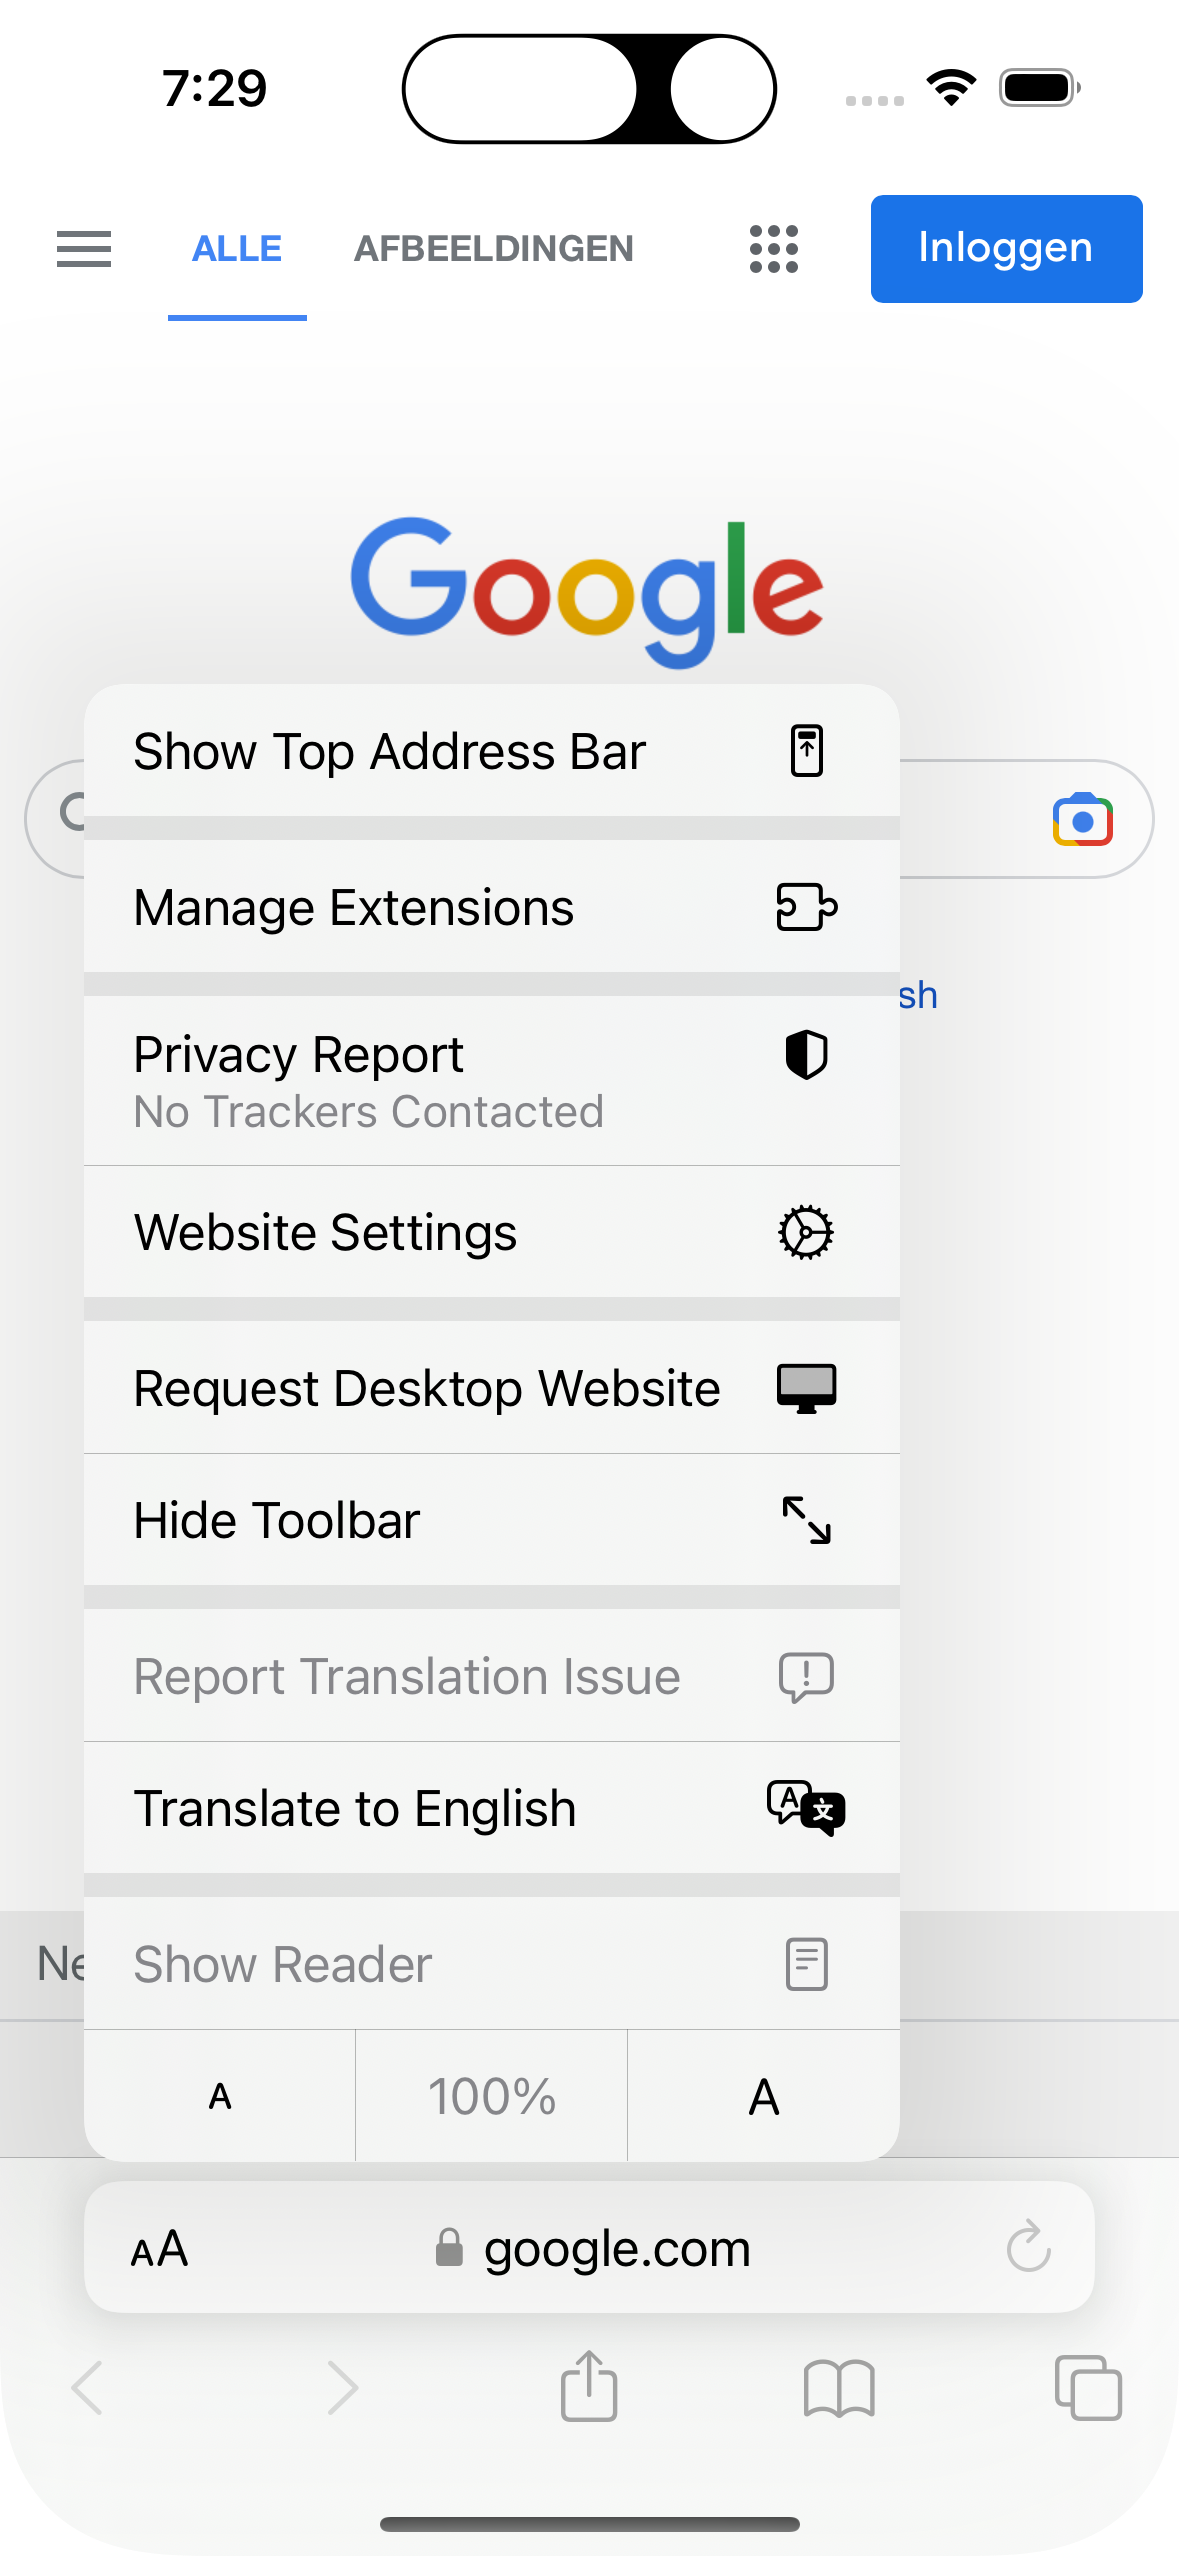 How to Build a Safari App Extension in iOS 15